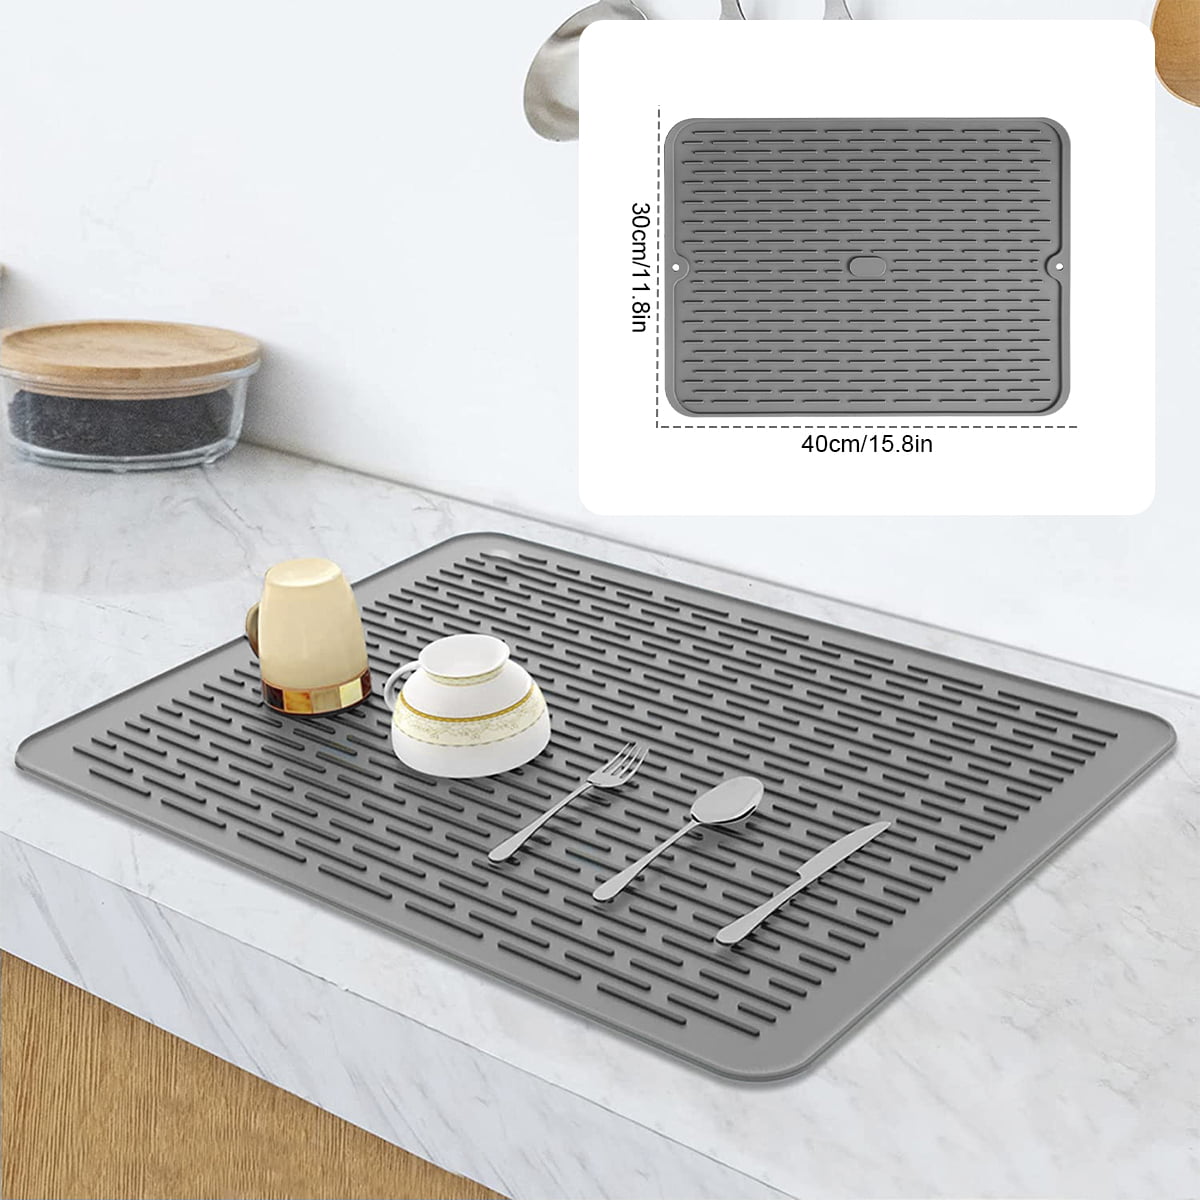 Dznils Dish Drying Mat Silicone Drying Mats for Kitchen Counter, Heat  Resistant Washable Rubber Drying Rack Mat for Dishes Easy Clean